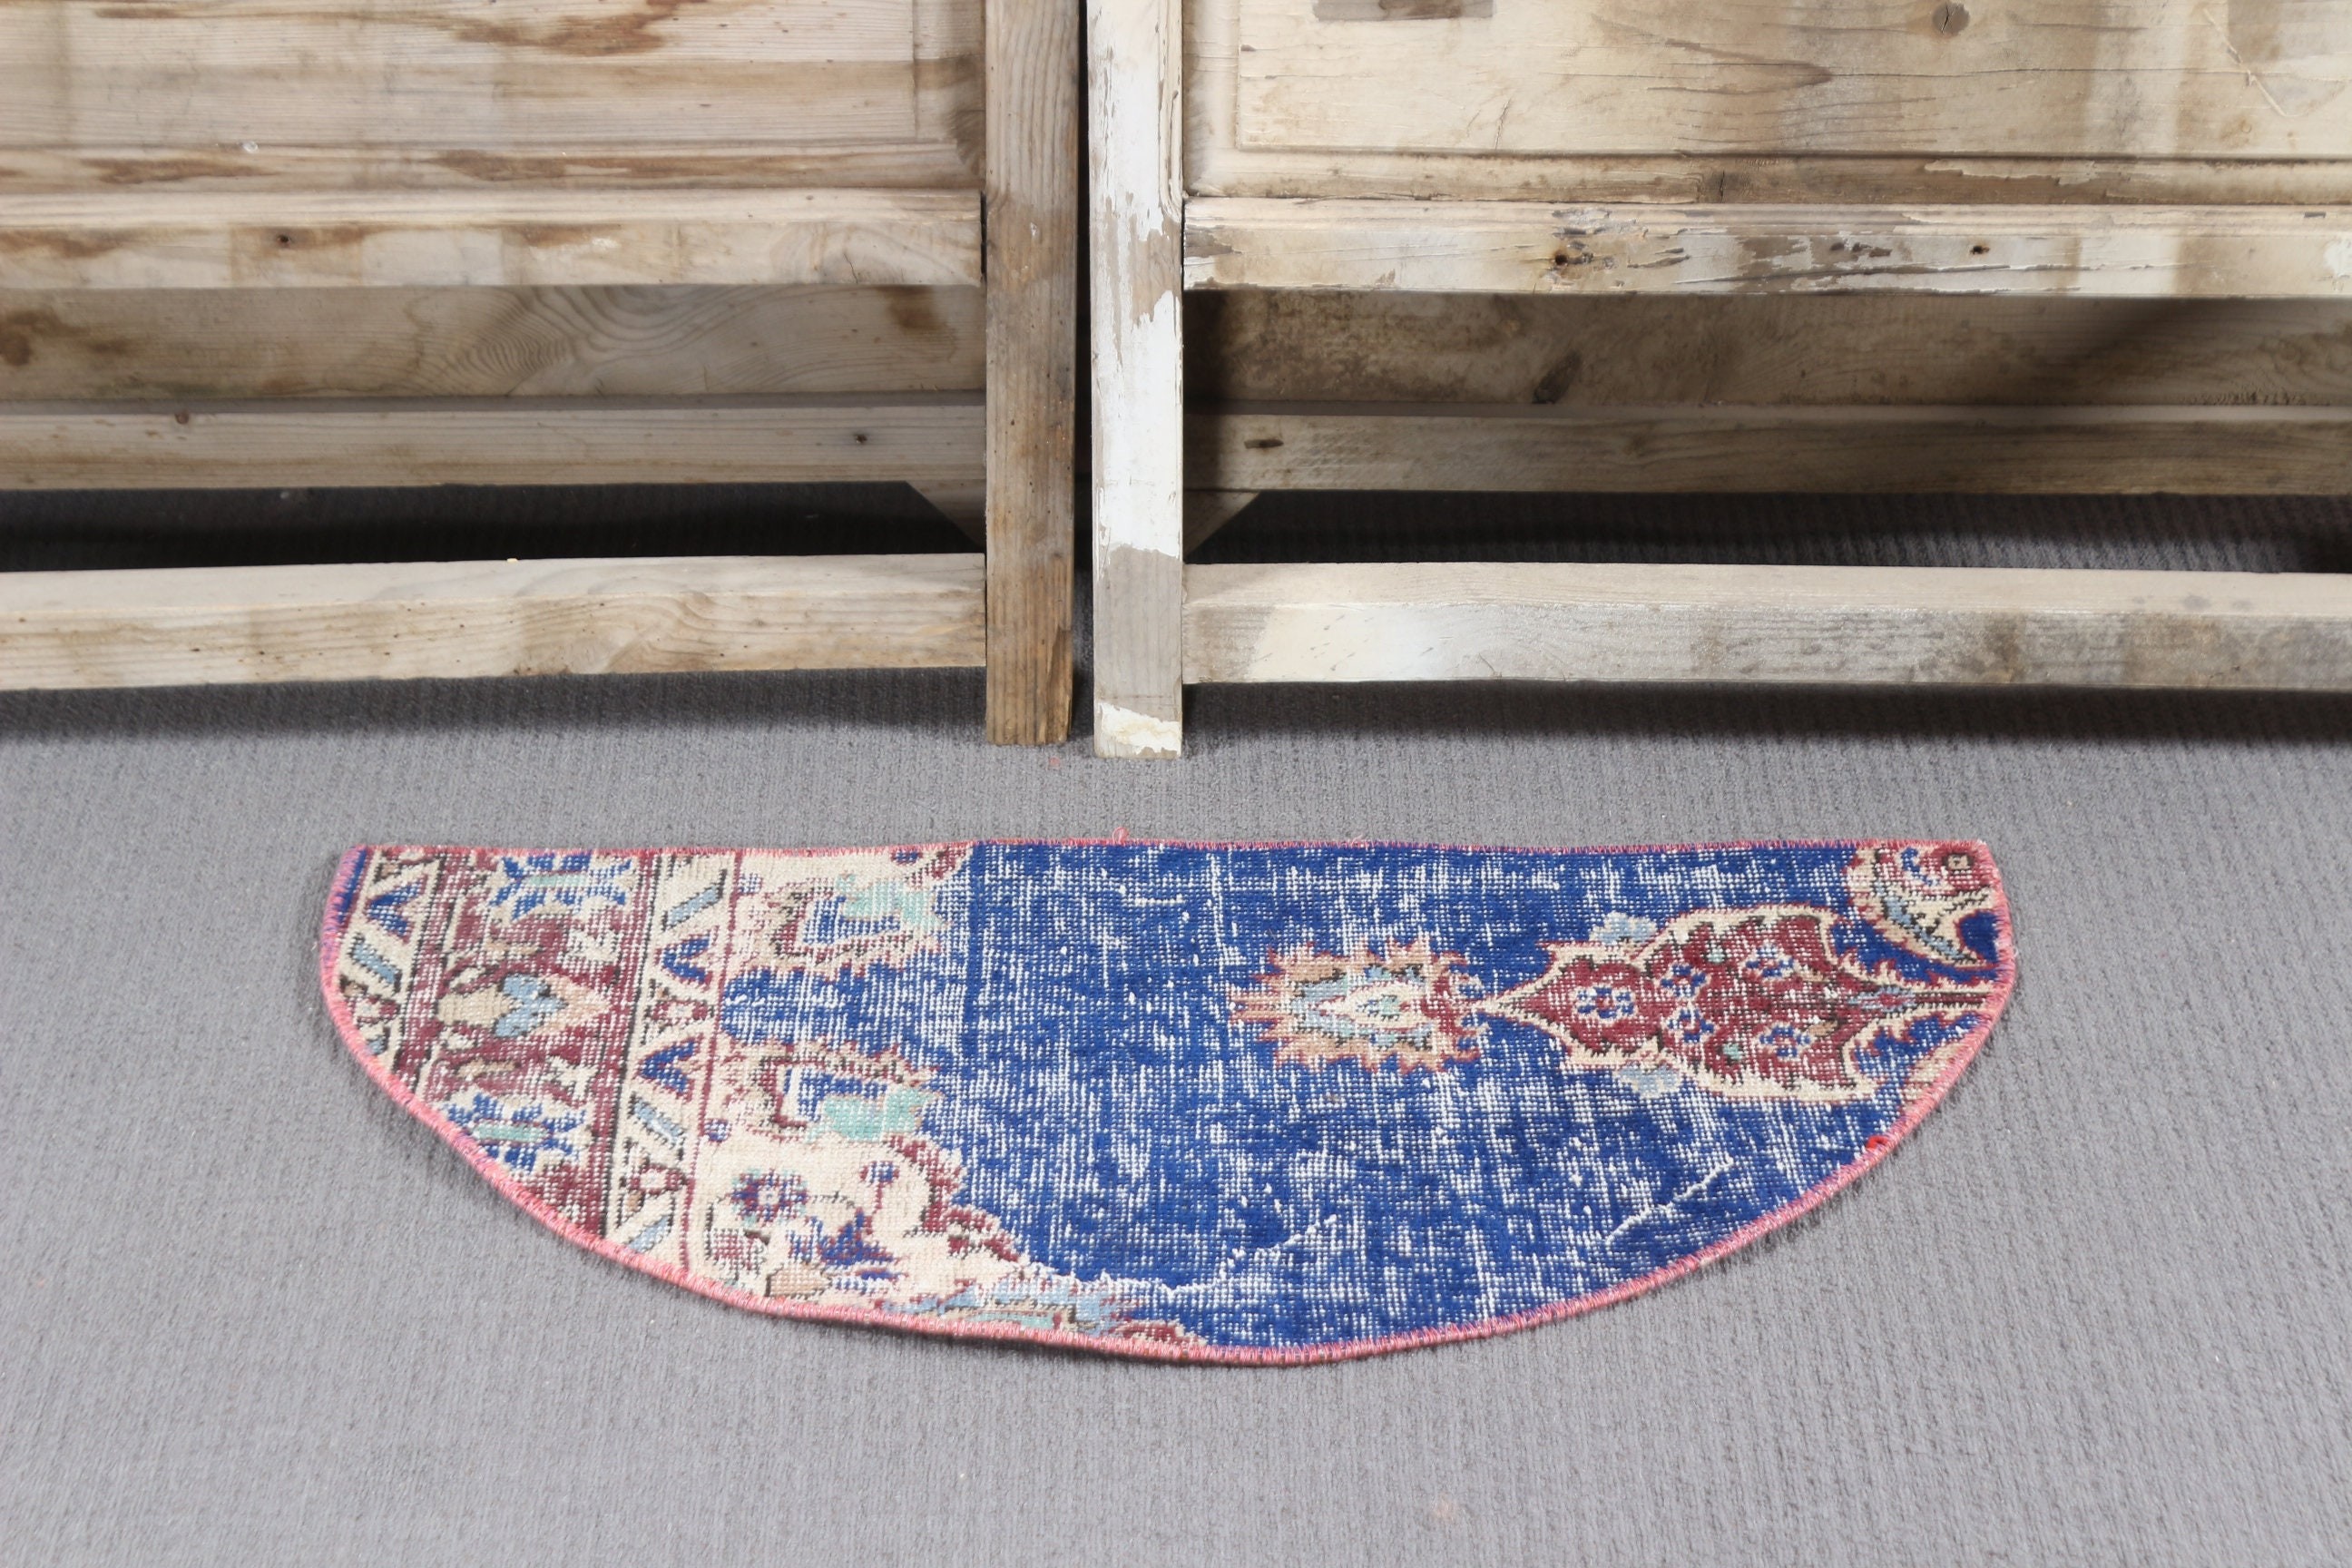 Blue Moroccan Rugs, 1.4x2.7 ft Small Rug, Vintage Rug, Home Decor Rug, Turkish Rugs, Bedroom Rugs, Entry Rug, Hand Woven Rugs, Kitchen Rug